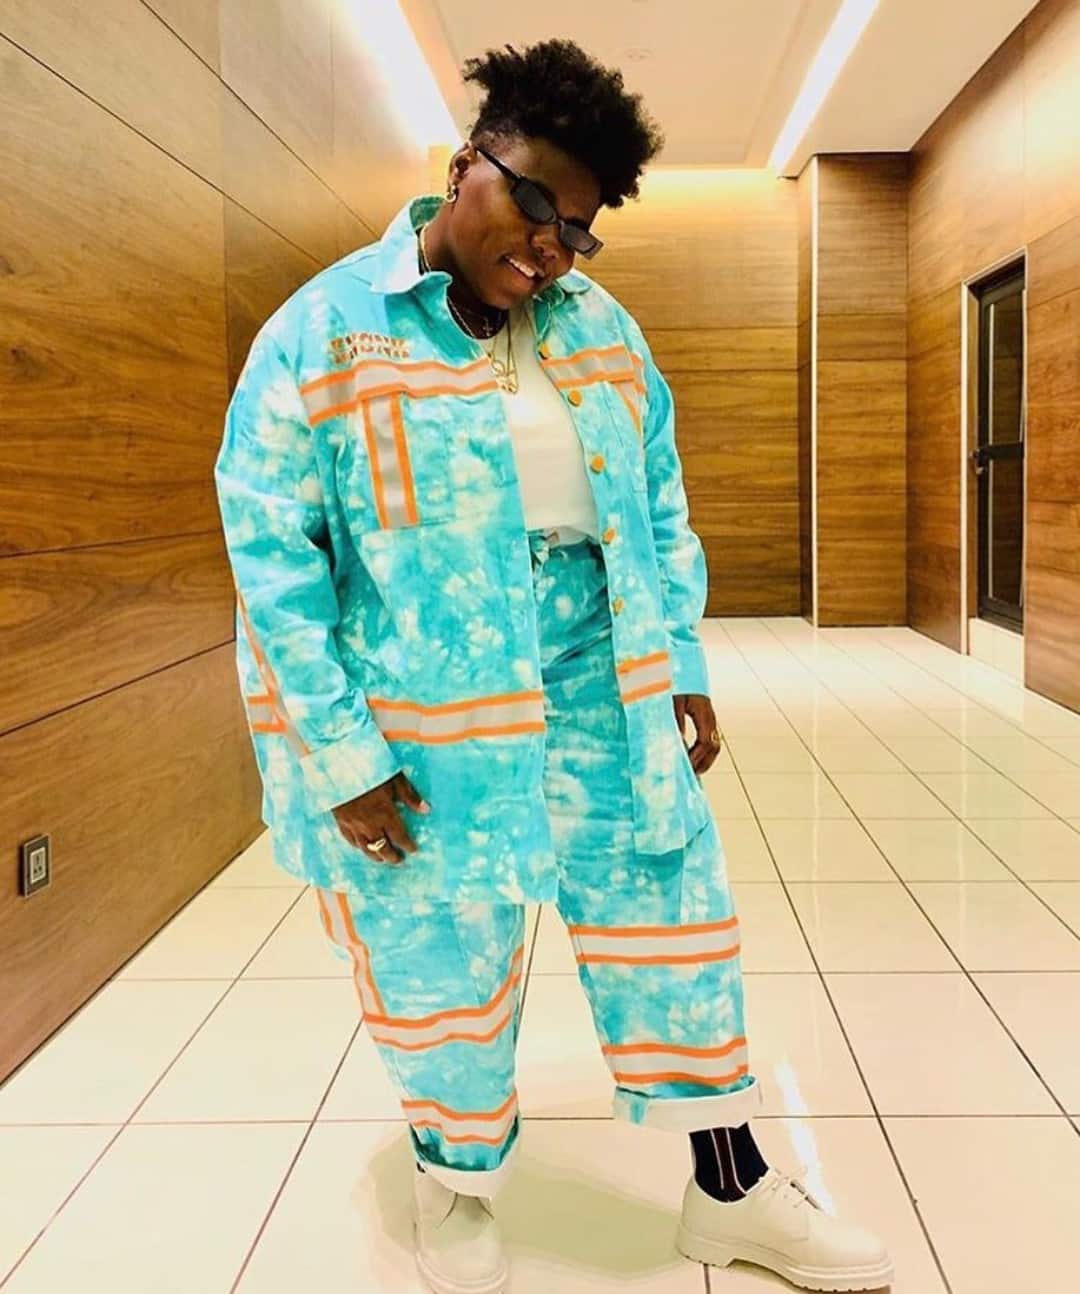 Teni gifts N100k to a fan's mother after she expressed love for her (Video)